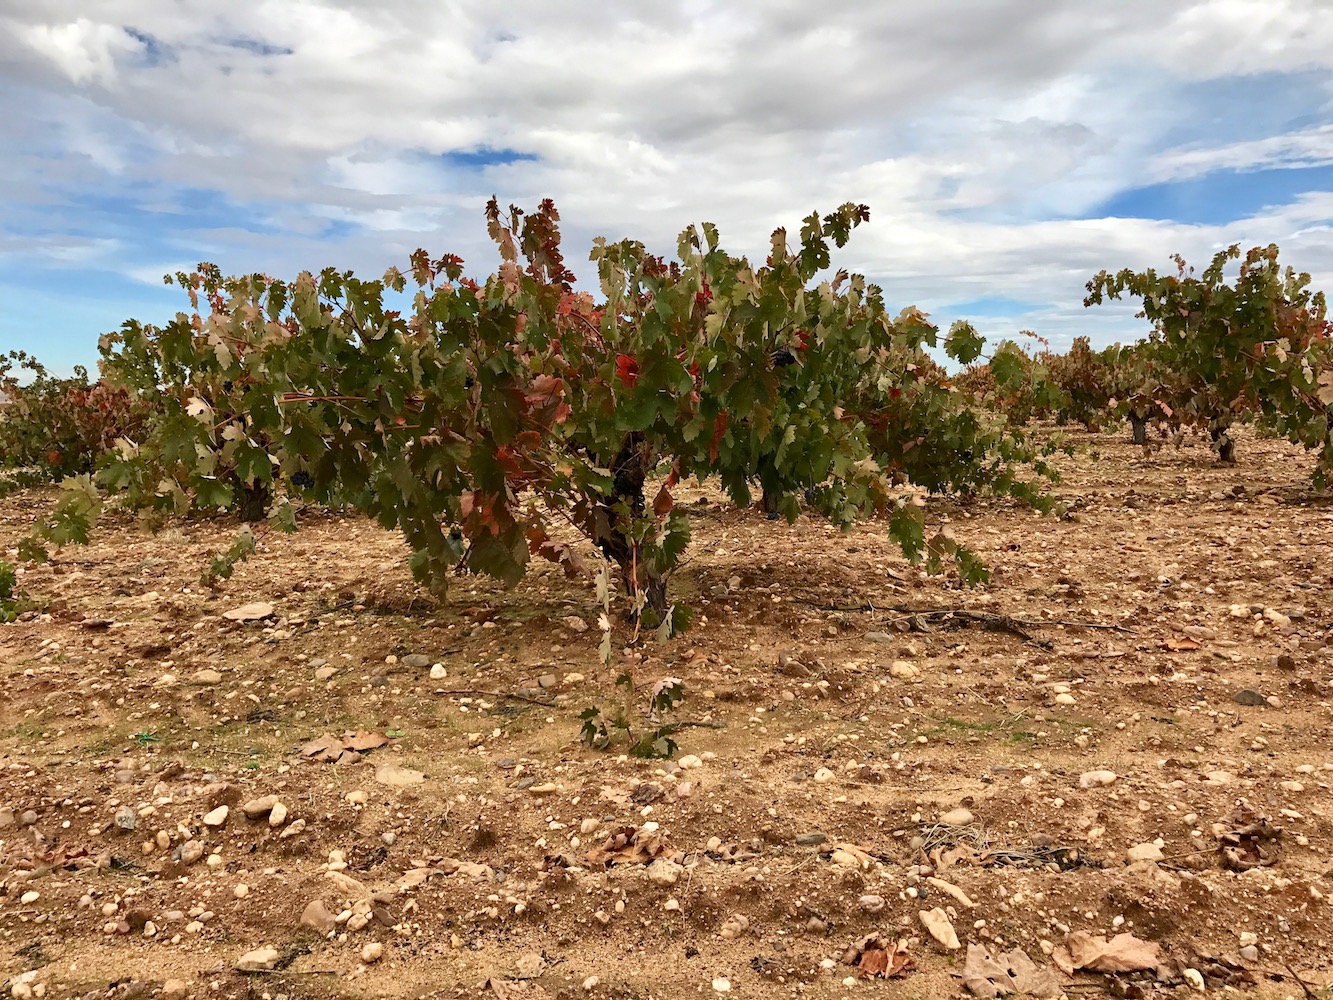  You'll find bush vines in many of San Román's vineyards. 